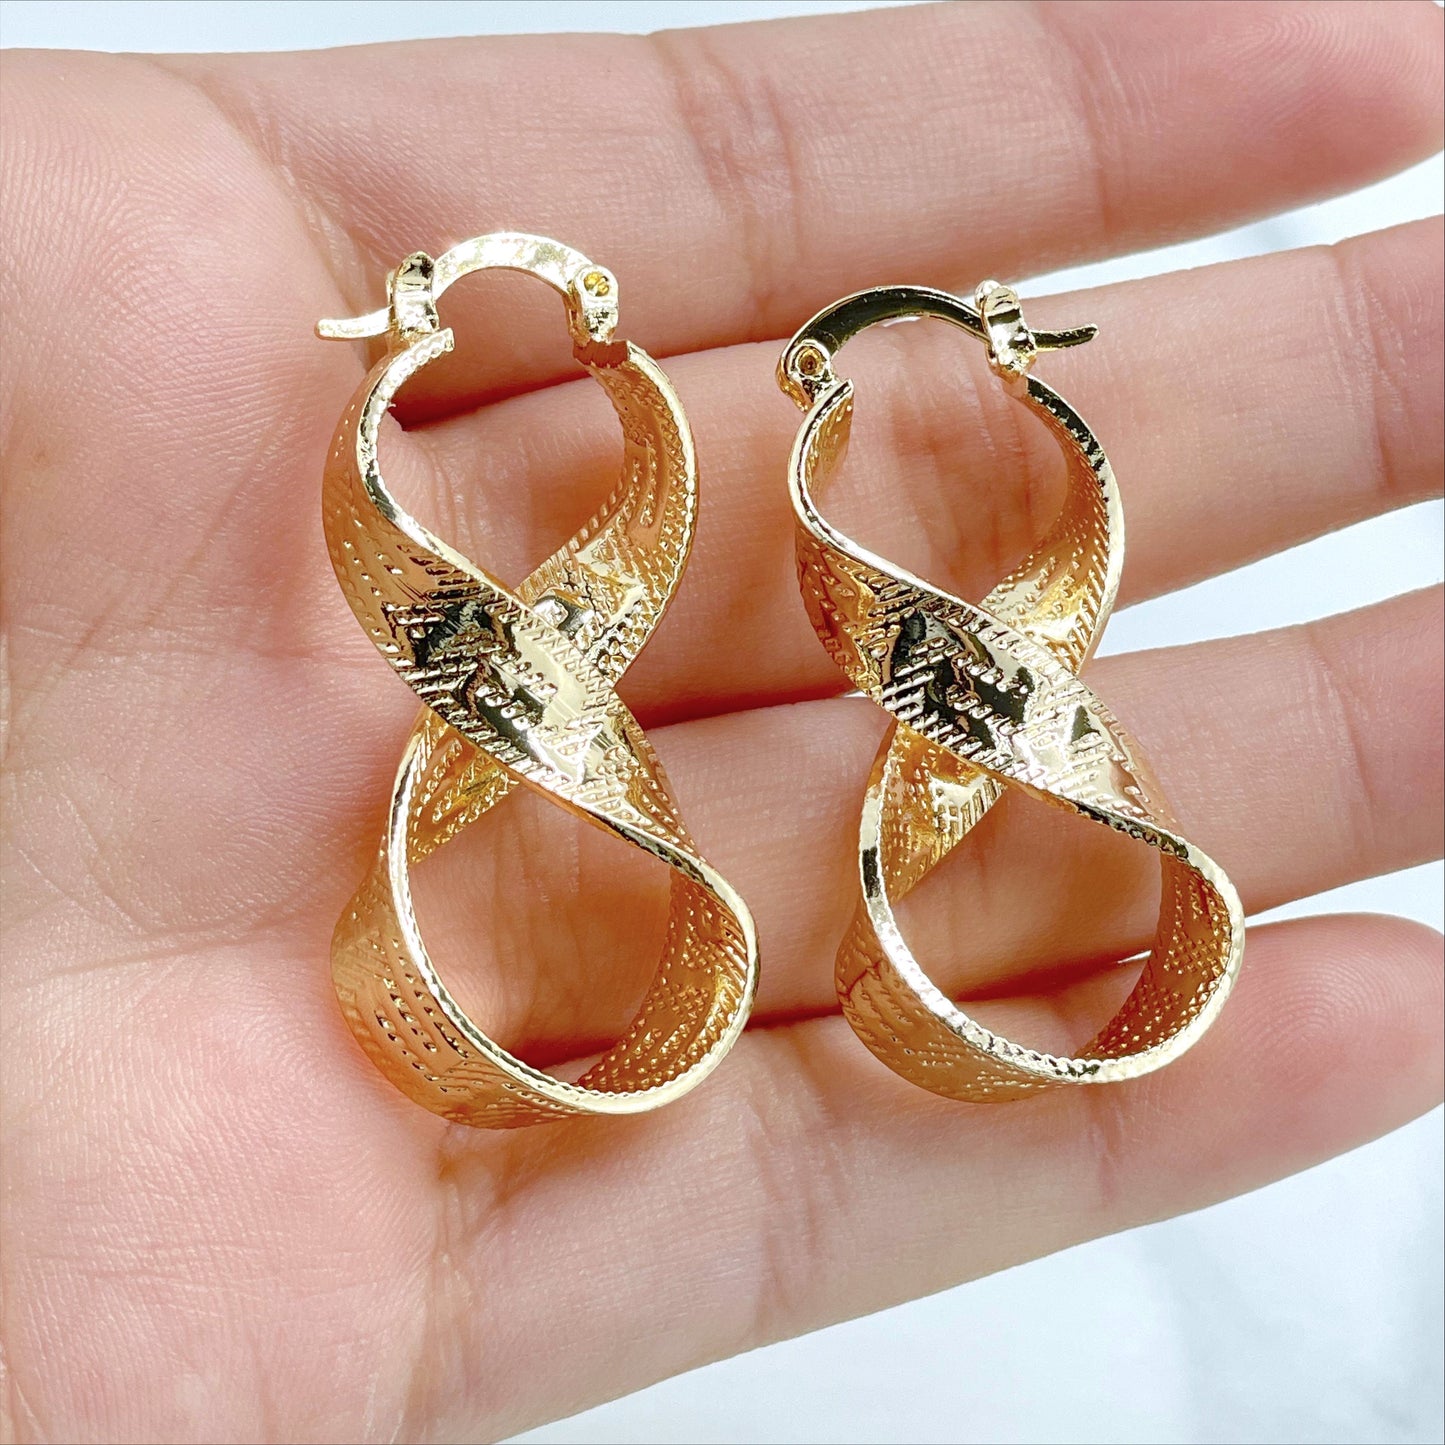 18k Gold Filled 40mm Textured Z Design Dangle Earrings, 6mm Thickness, Wholesale Jewelry Making Supplies